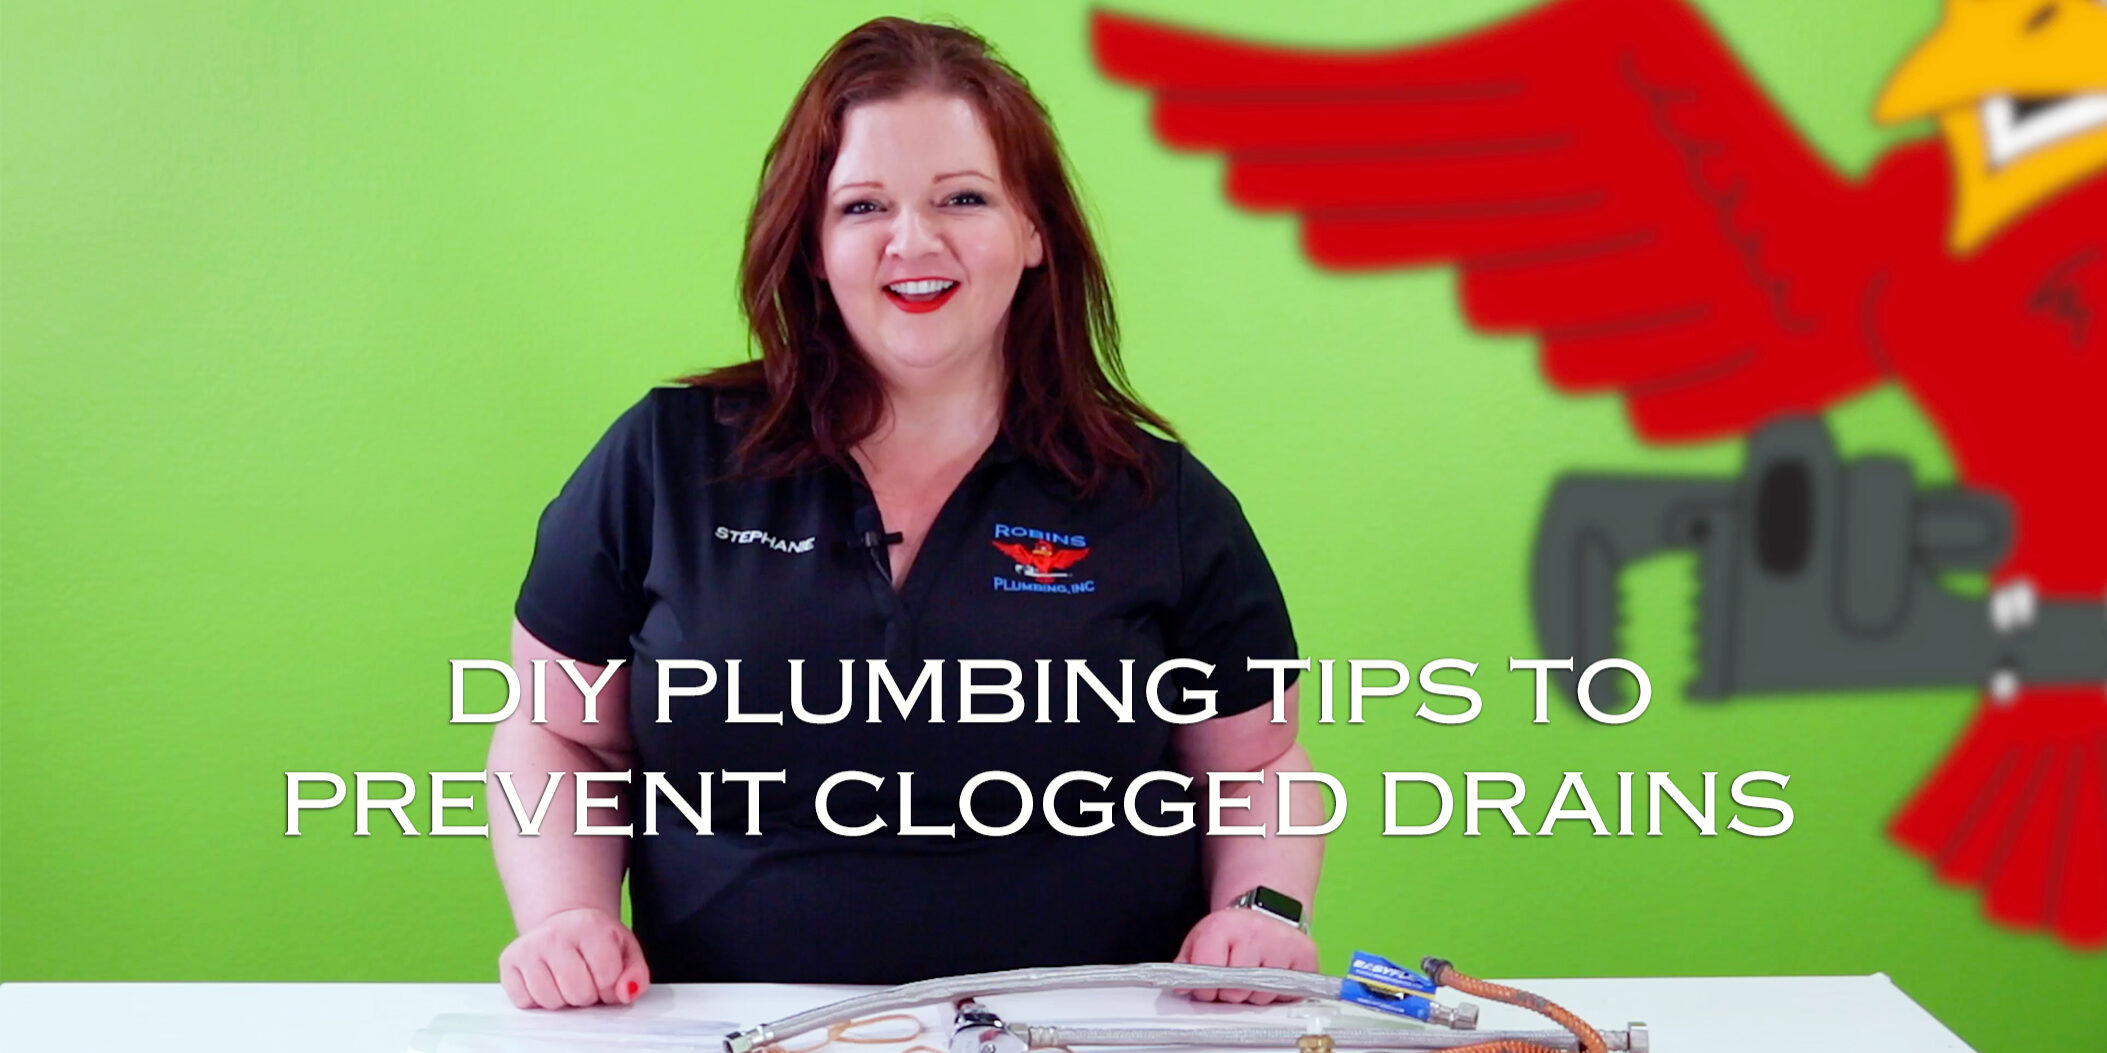 The owner of Robins Plumbing, Stephanie Robins featuring her blog titled DIY plumbing tips to prevent clogged drains.